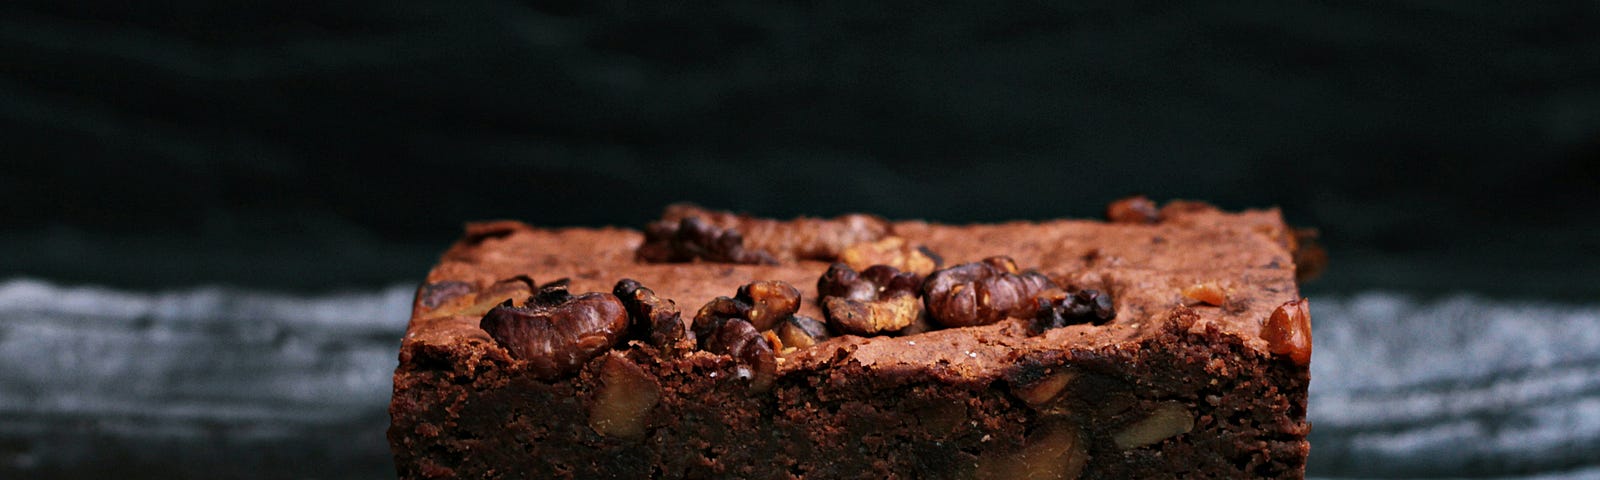 a single brownie with nuts